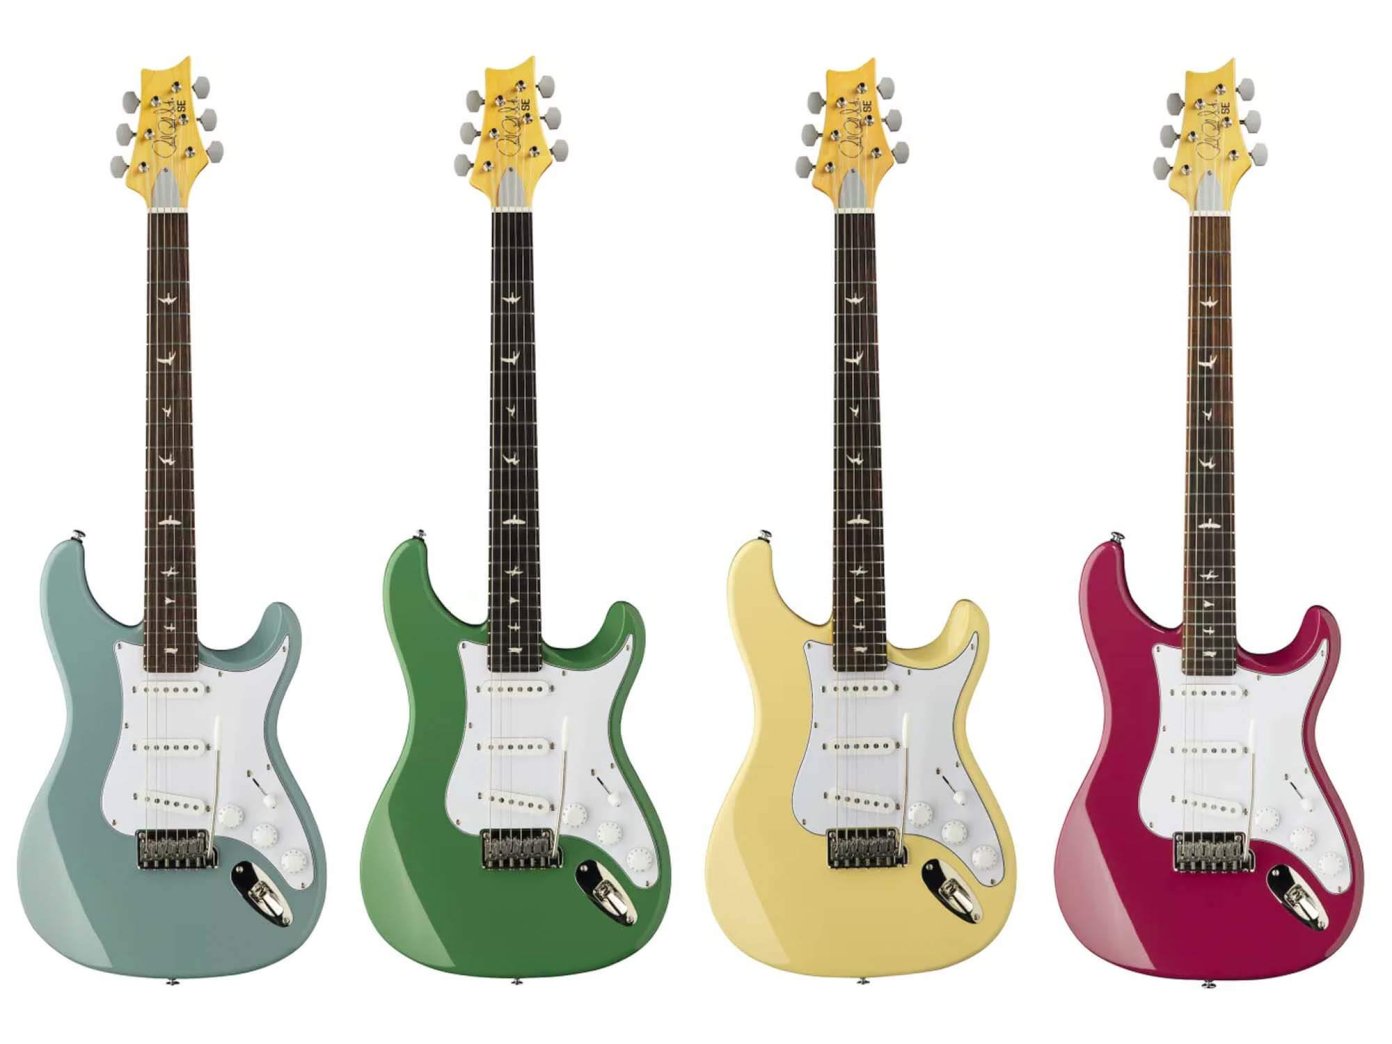 The PRS John Mayer Silver Sky SE is finally coming and it makes a few